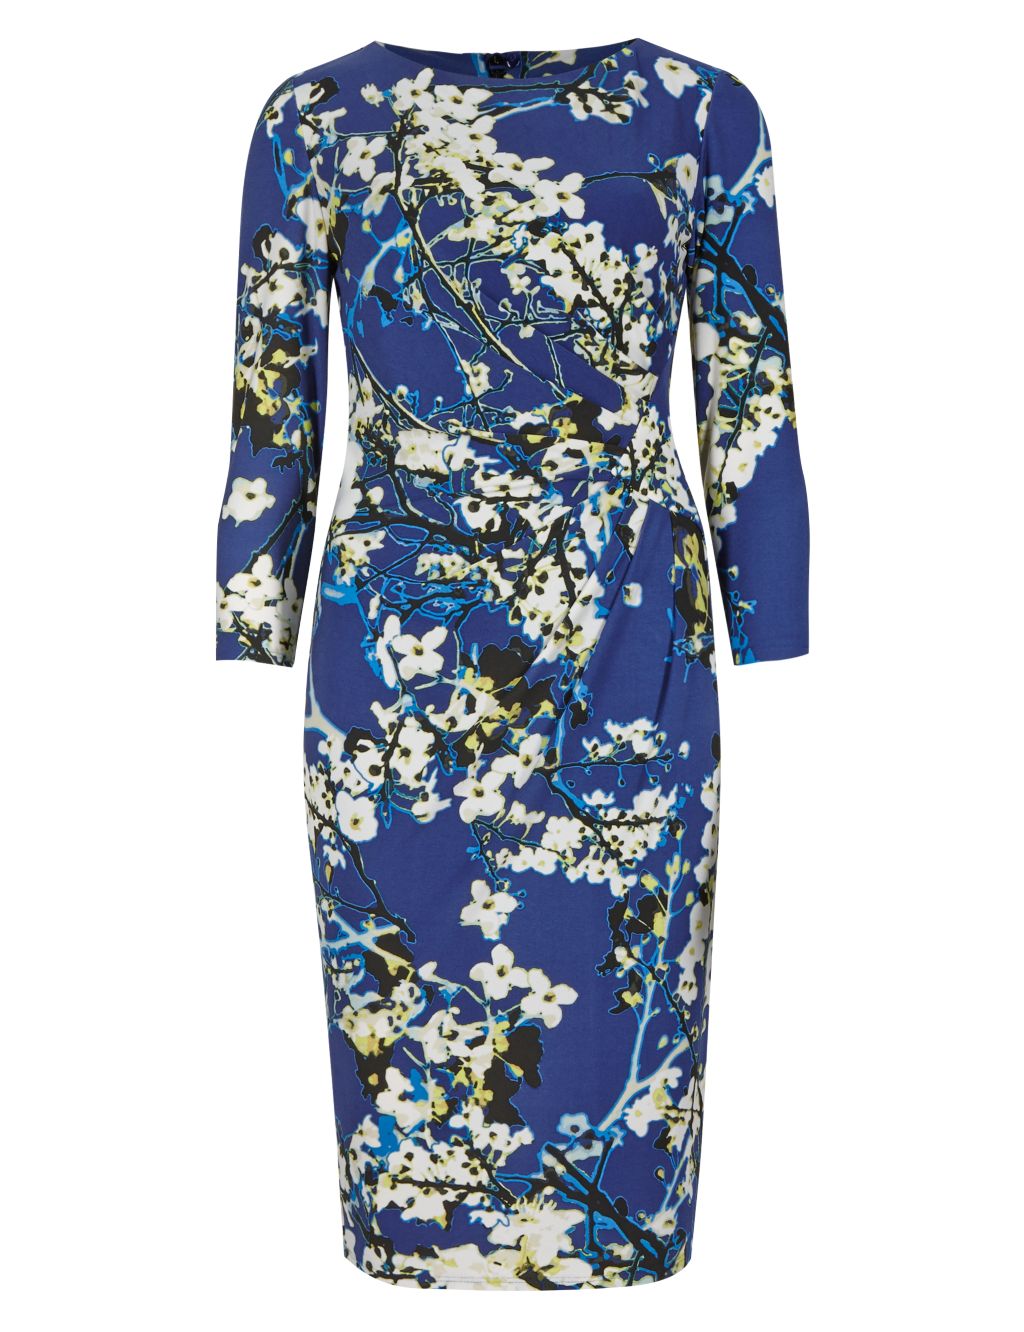 Drop a Dress Size Side Pleated Floral Shift Dress | M&S Collection | M&S